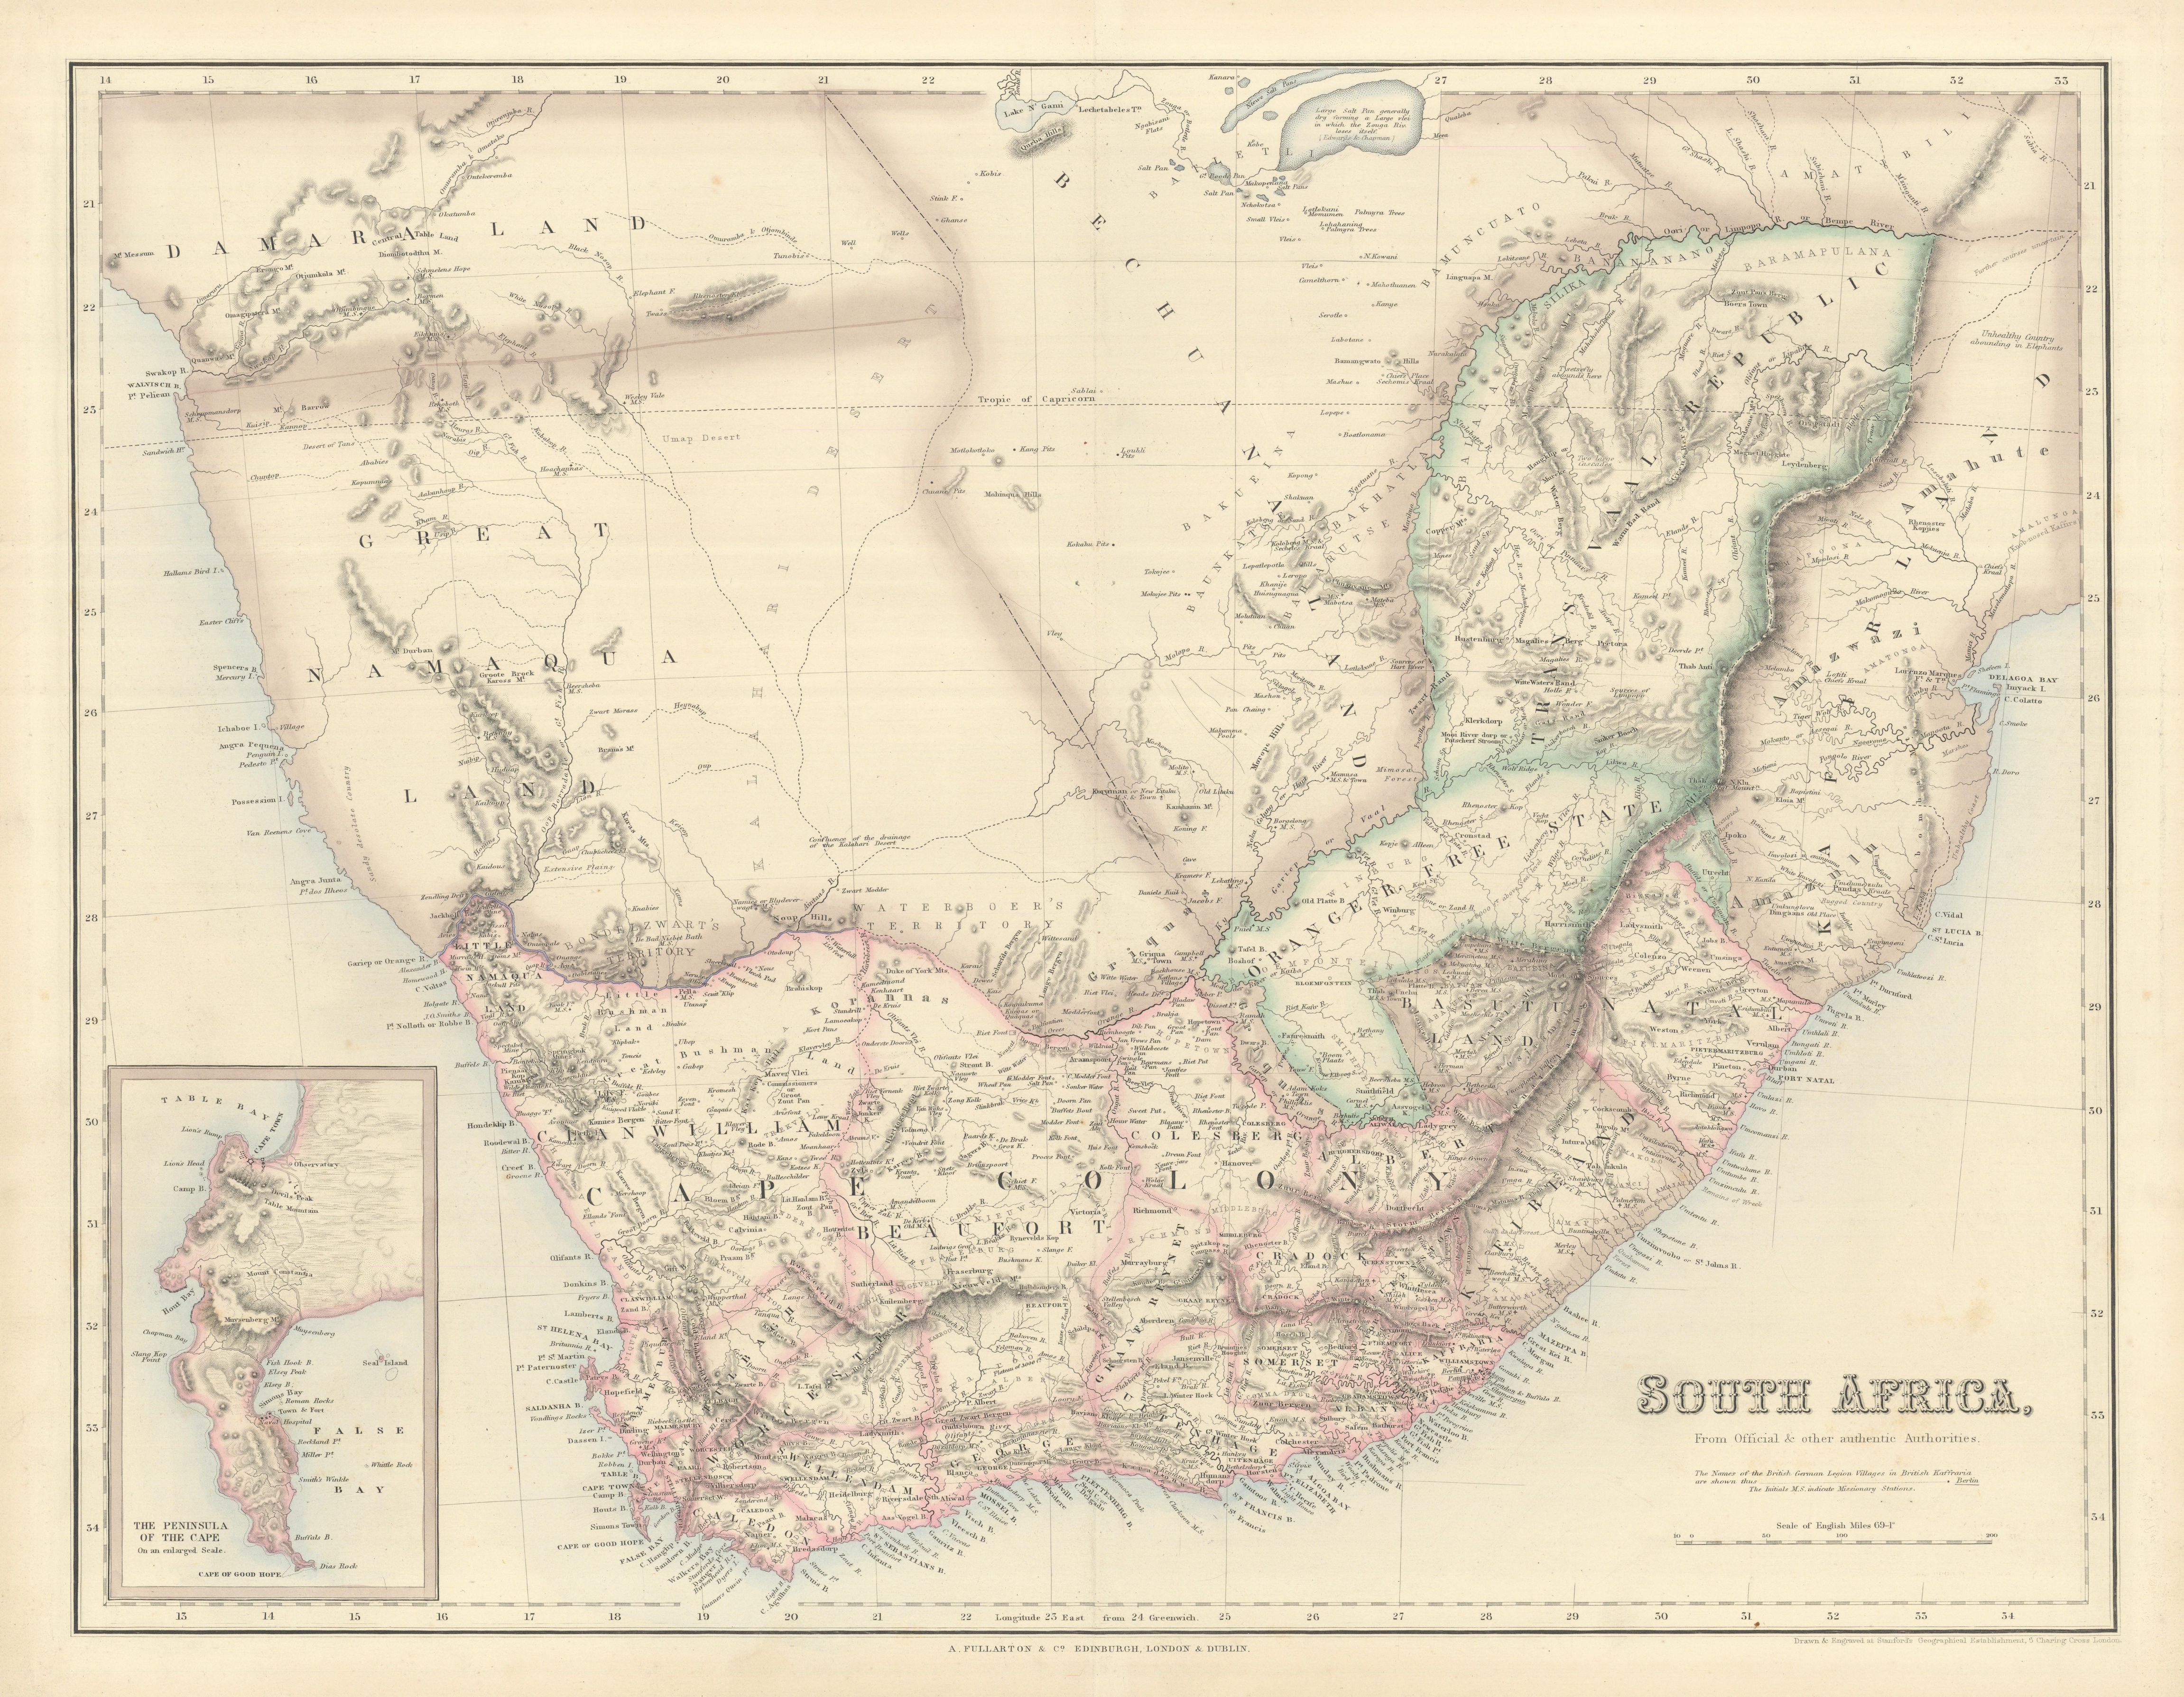 Associate Product Southern Africa. Cape Town. Bechuanaland Gt Namaqua Land. SWANSTON 1860 map